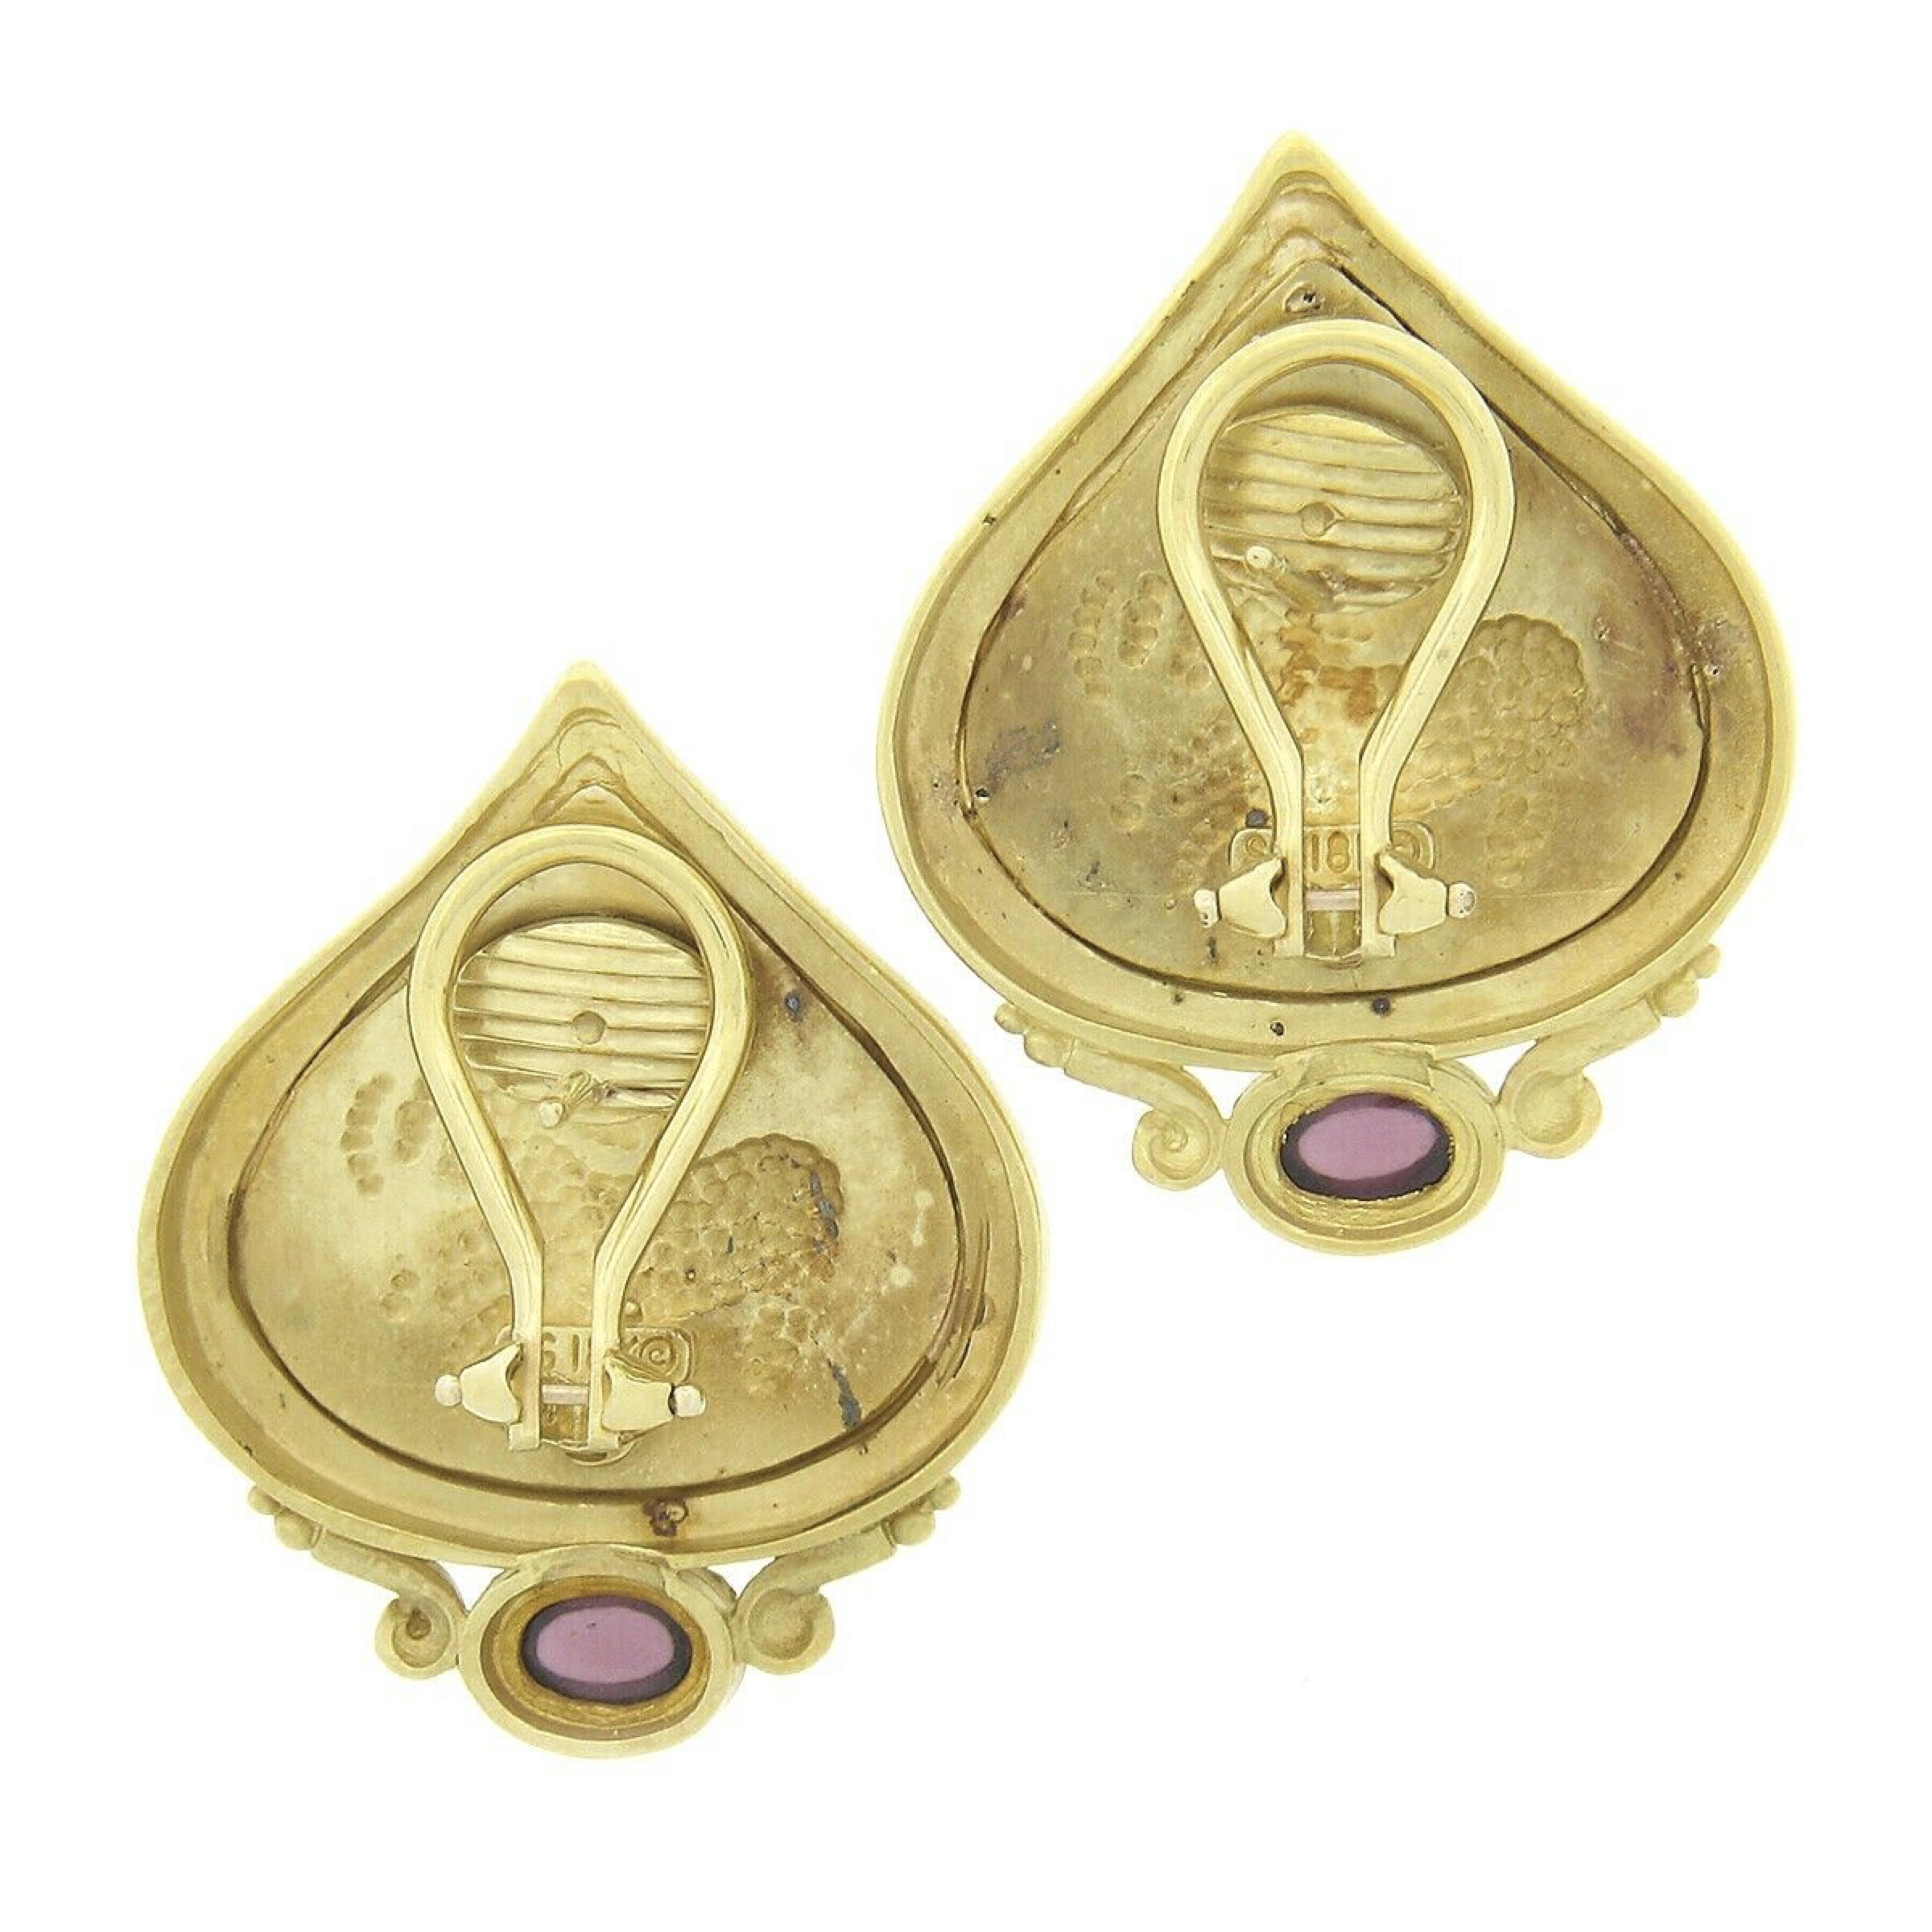 Seidengang 18K Gold Cabochon Bezel Pink Tourmaline Horse Scene Athena Earrings In Good Condition For Sale In Montclair, NJ